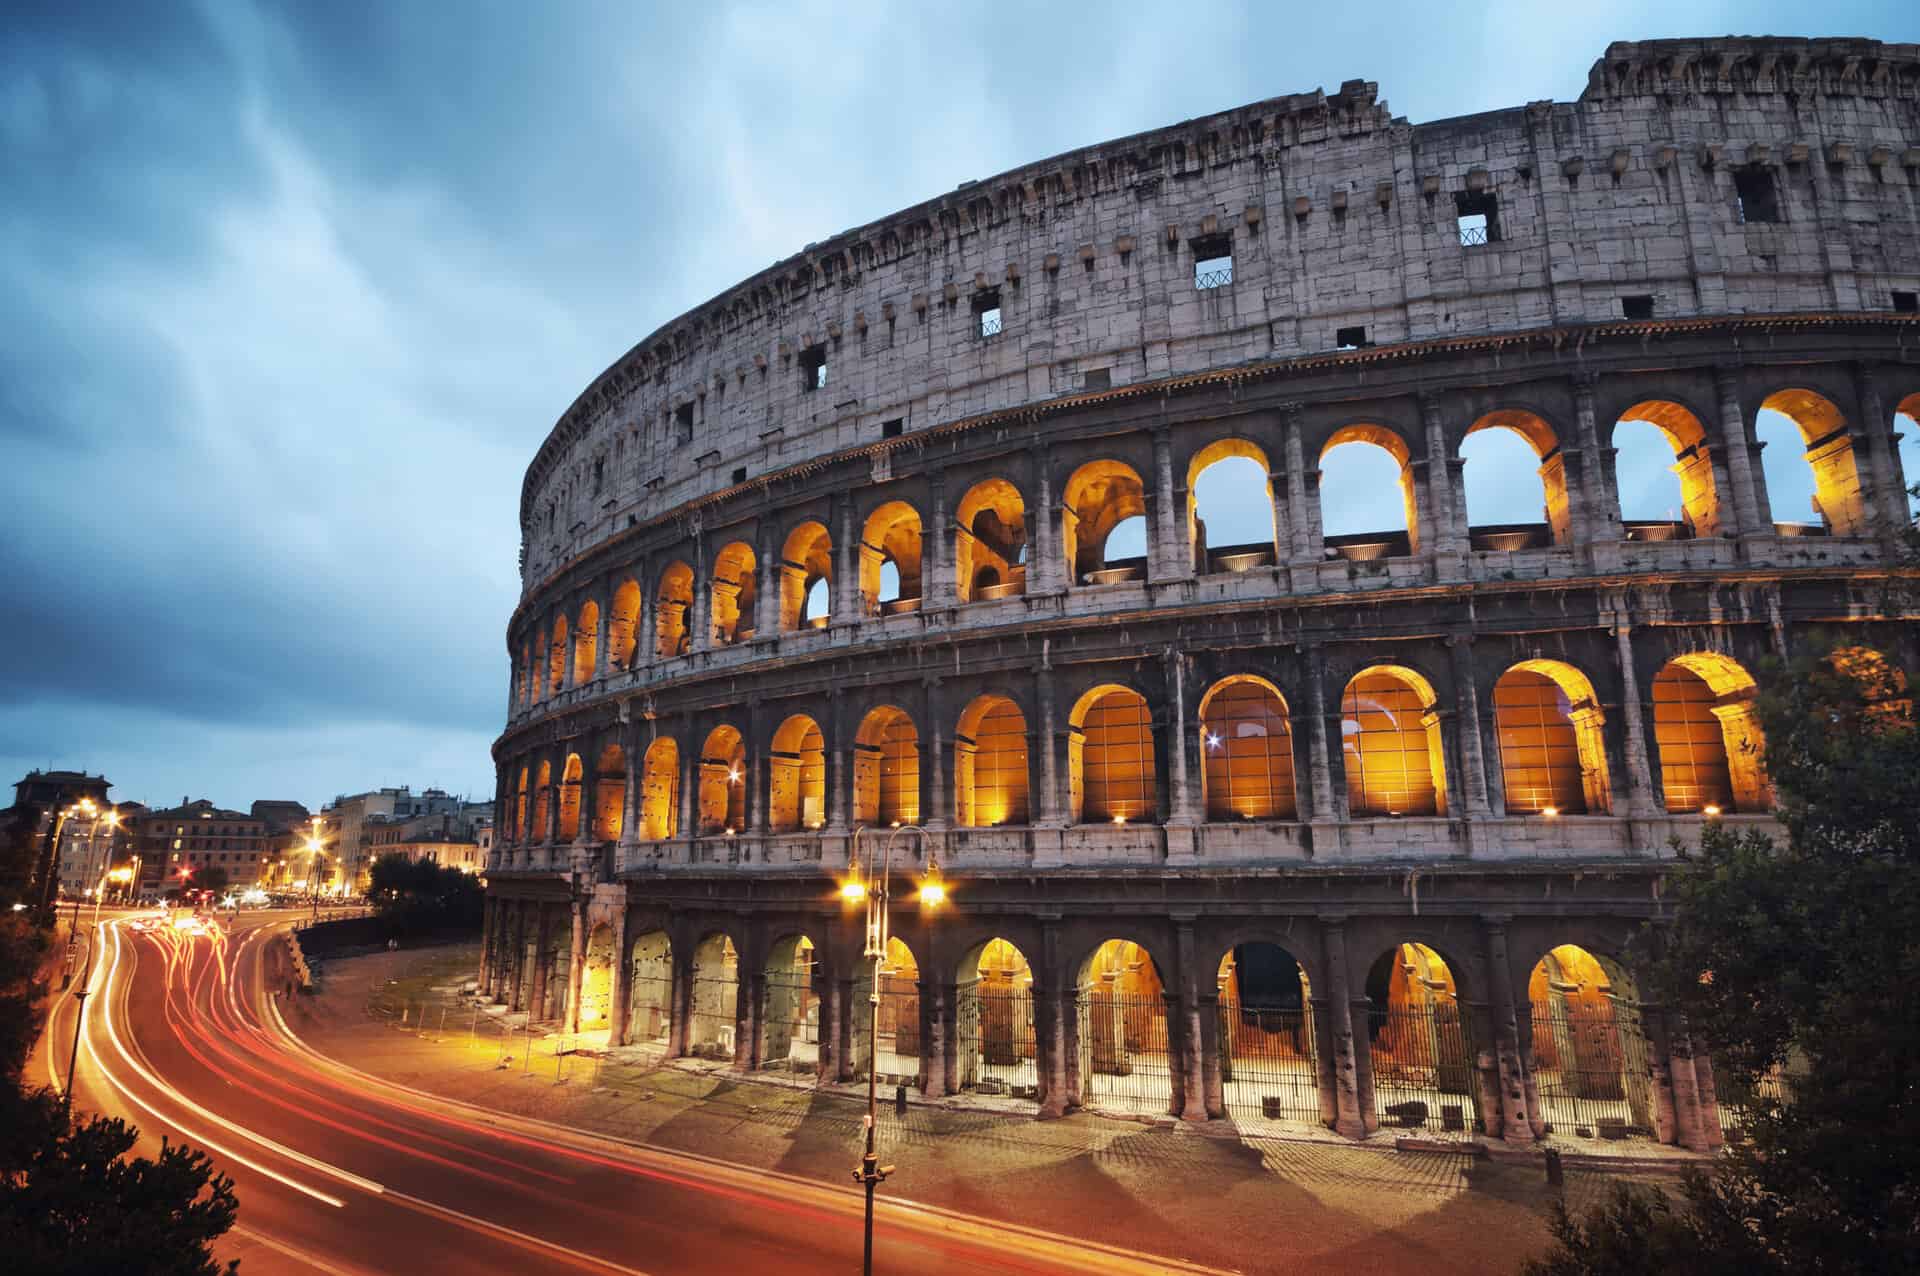 The Coliseum in Rome, Italy with dark skies and bright lighting